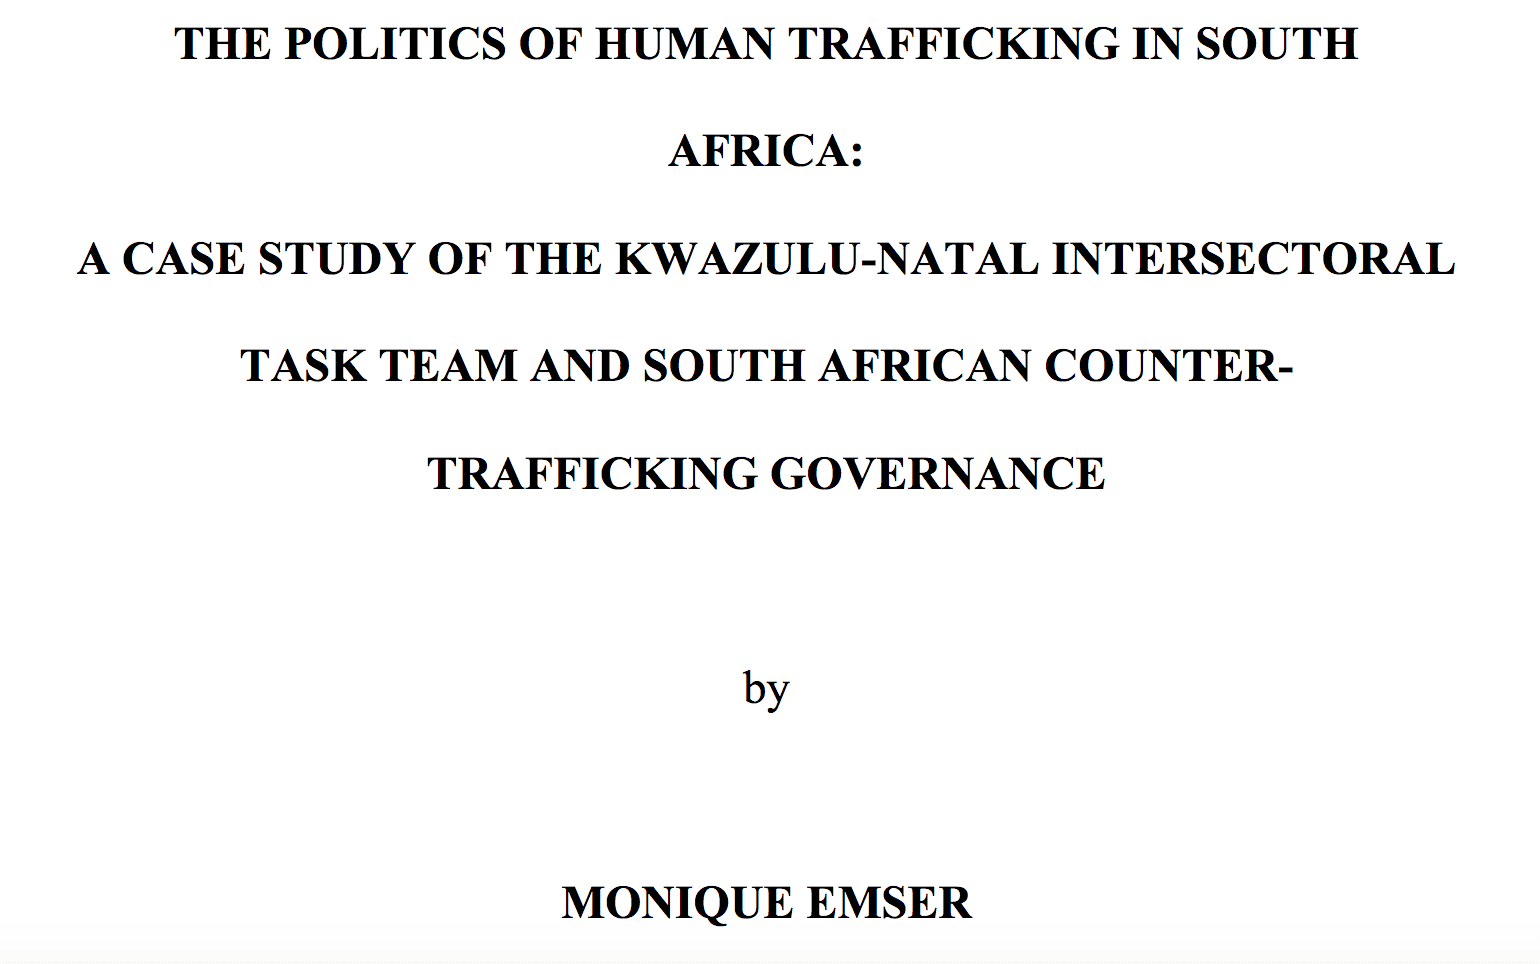 The politics of human trafficking in South Africa: A case study of the Kwazulu-Natal intersectoral task team and South African counter-trafficking governance